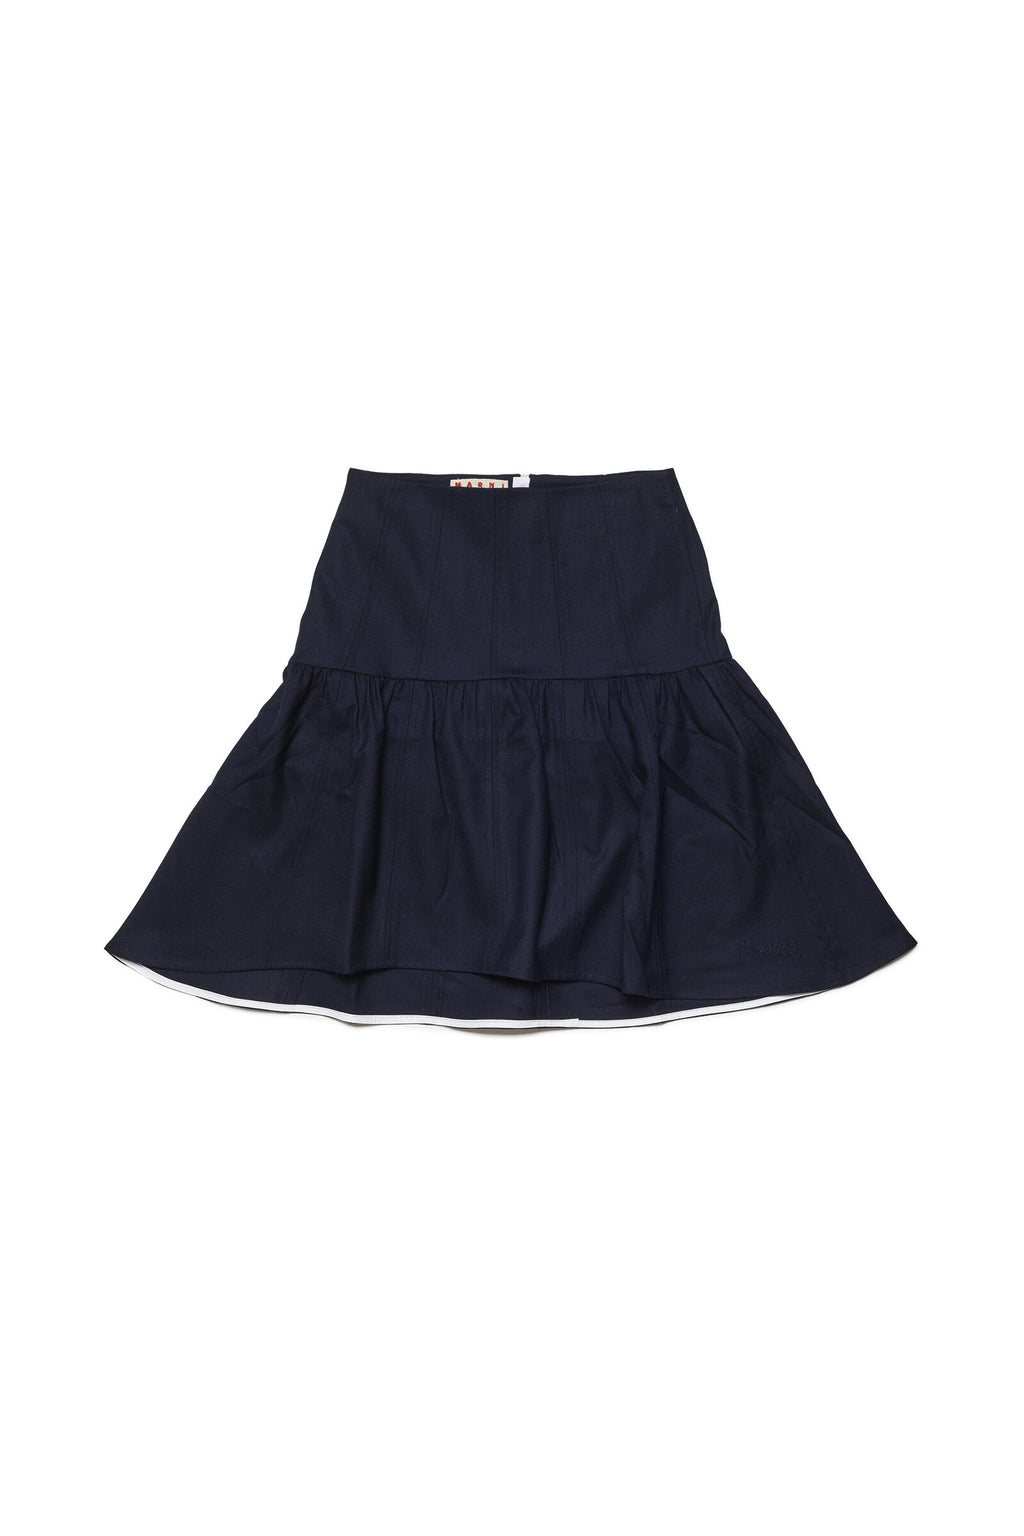 Flannel skirt with flared bottom